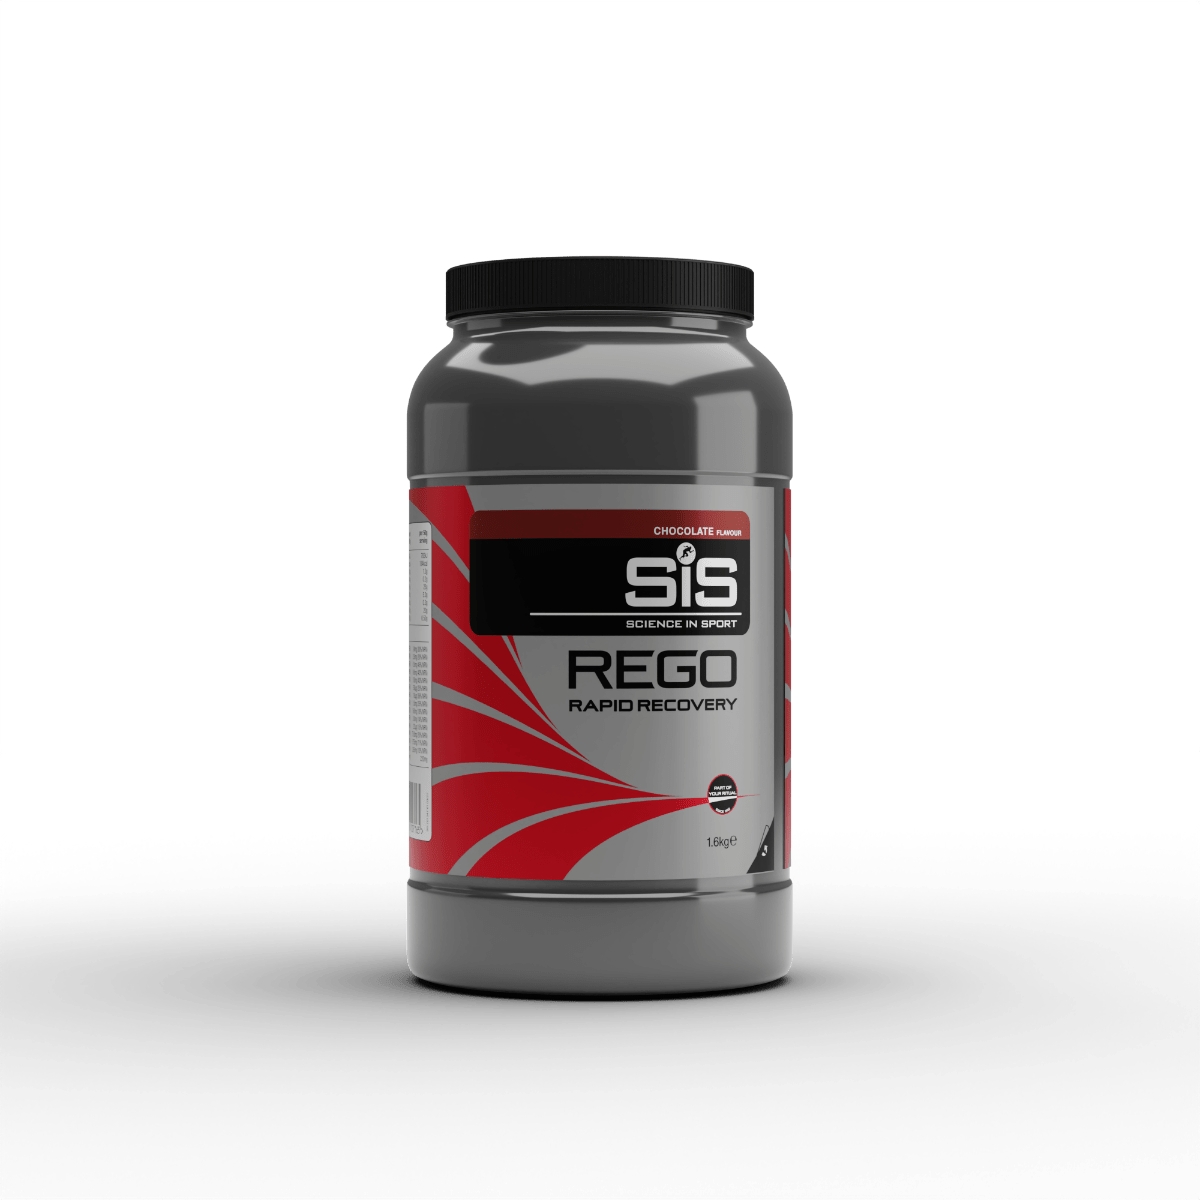 SiS Protein Drink 32 Serving Tub (1.6kg) / Chocolate REGO Rapid Recovery XMiles